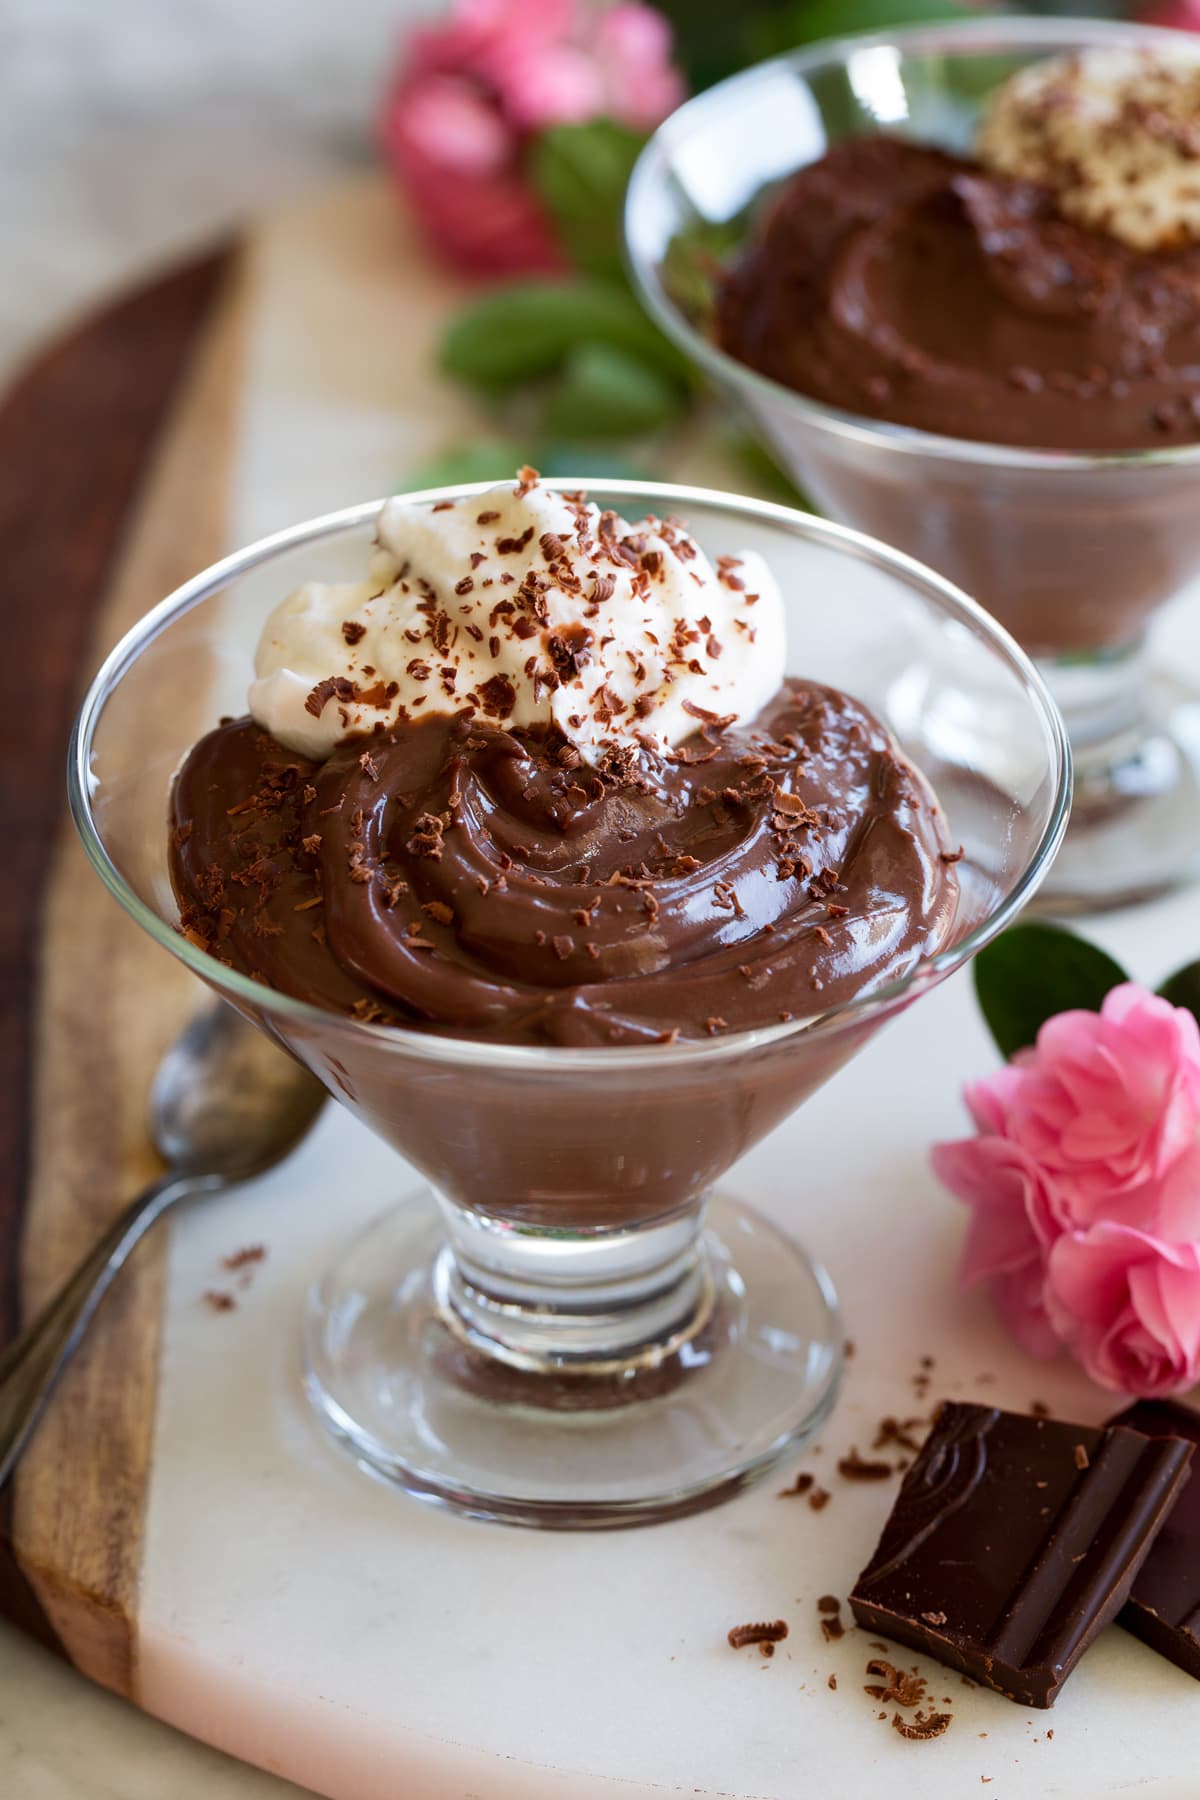 Photo: Single serving of chocolate pudding in a pretty glass cup with dark chocolate pieces shown to the side.